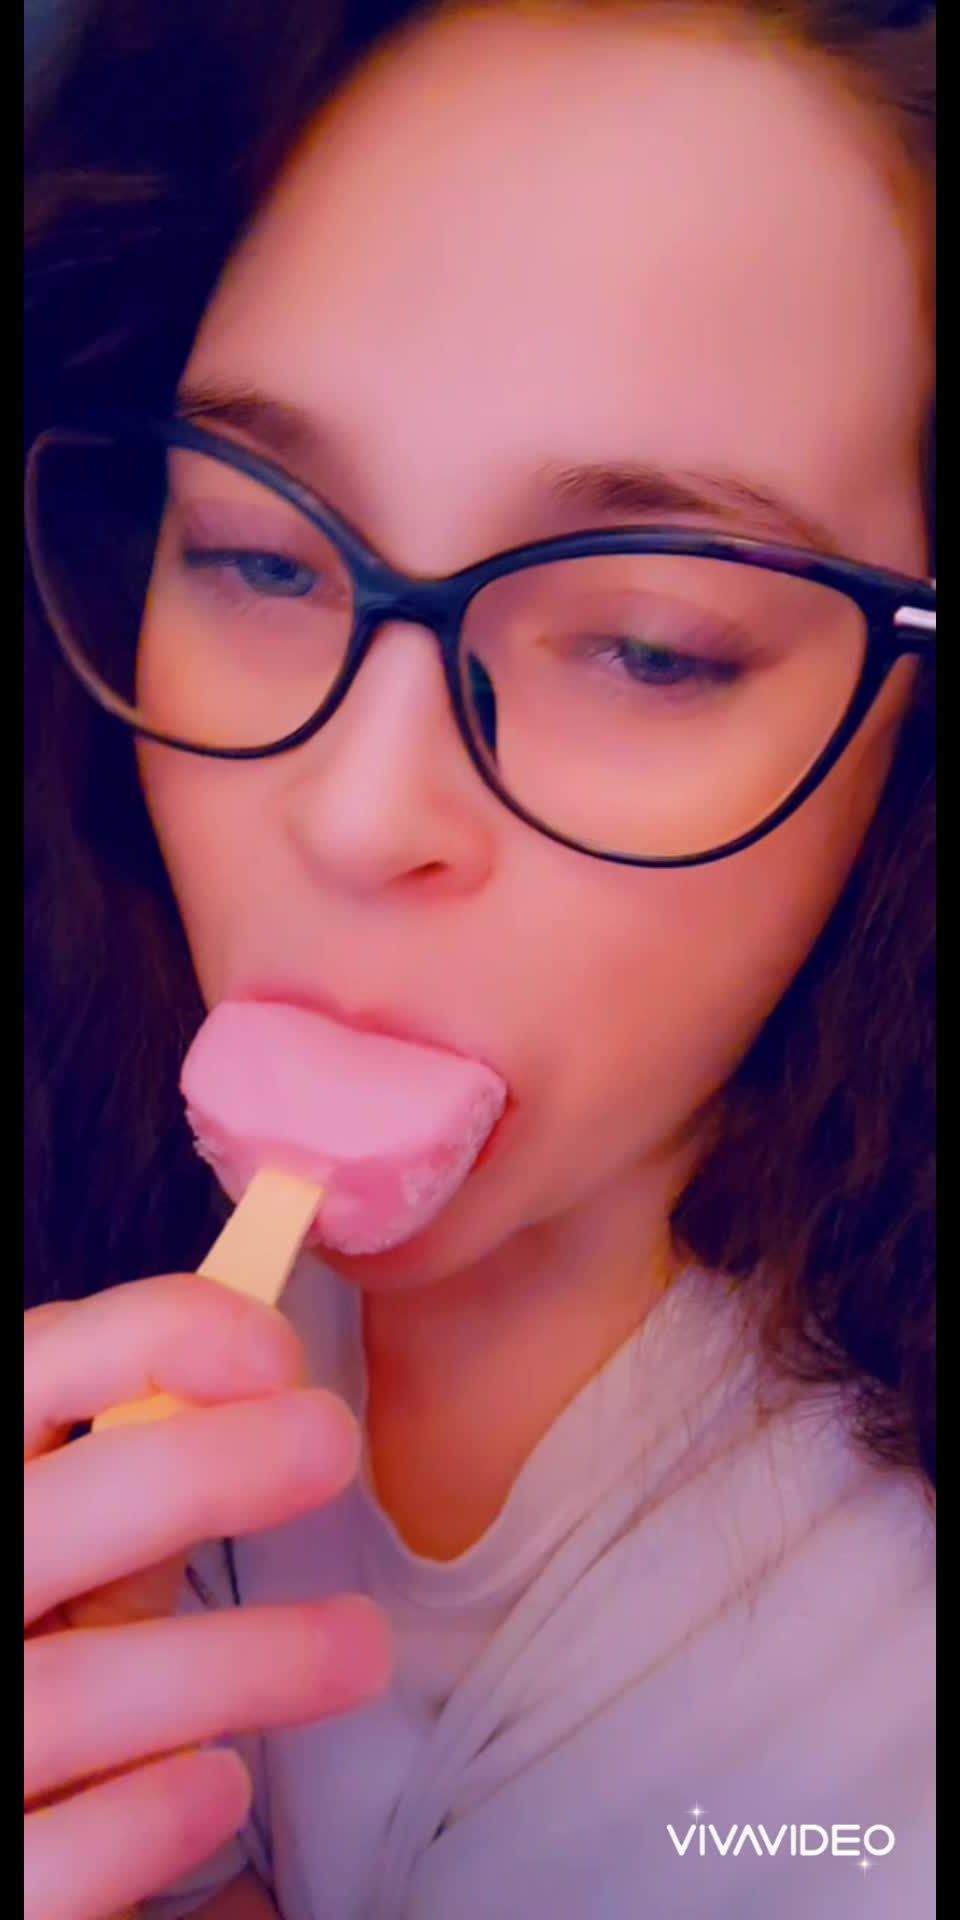 M@nyV1ds - CaityFoxx - Teasing with a Popsicle and Lingerie